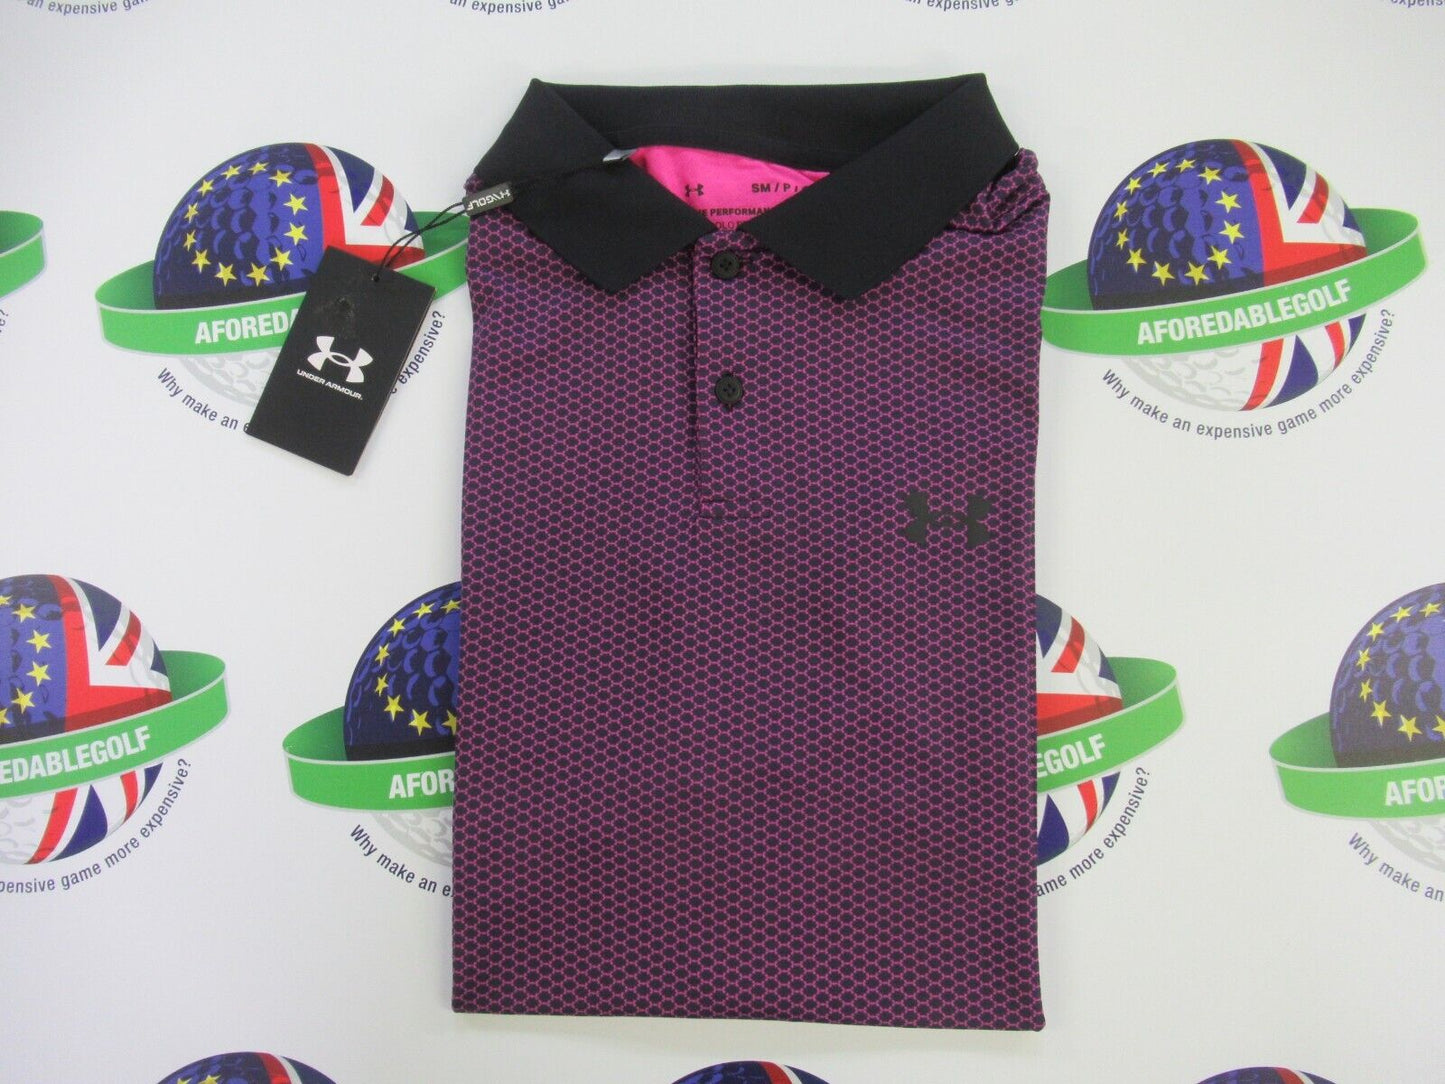 under armour the performance polo 3.0 printed black/rebel pink uk size small